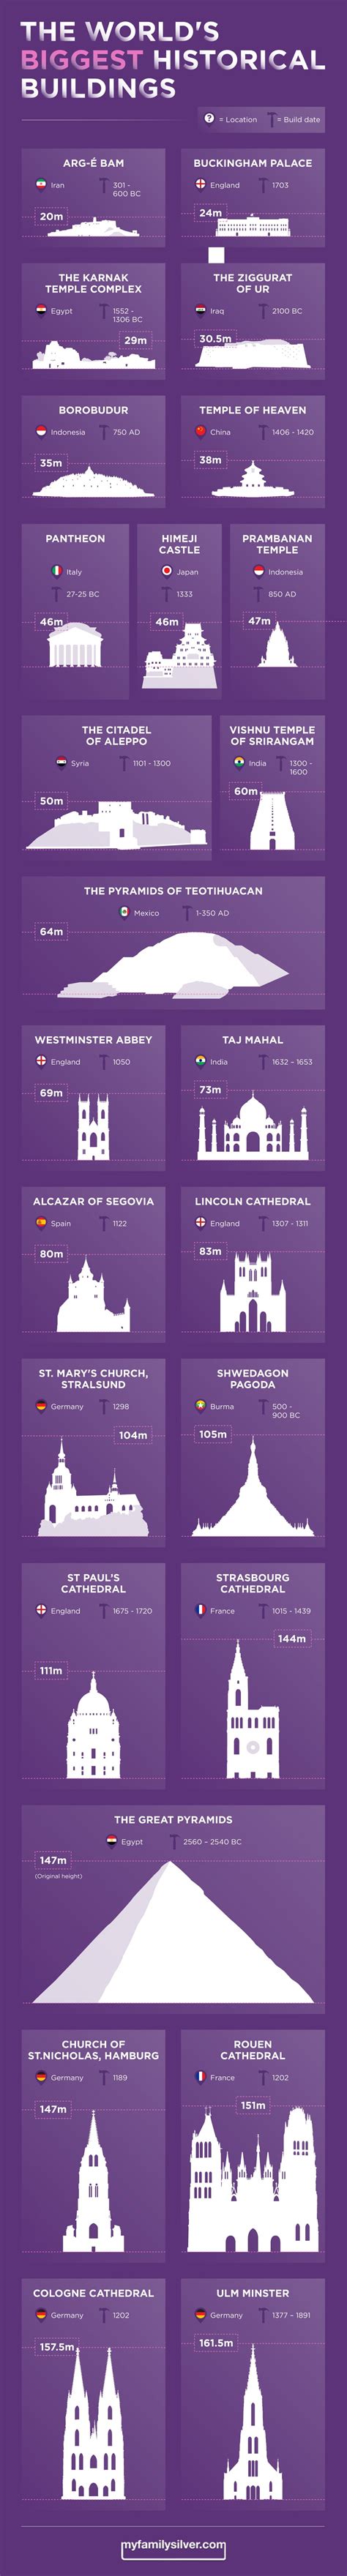 The World’s Biggest Historical #Buildings - Do you fancy an infographic? There are a lot of them ...